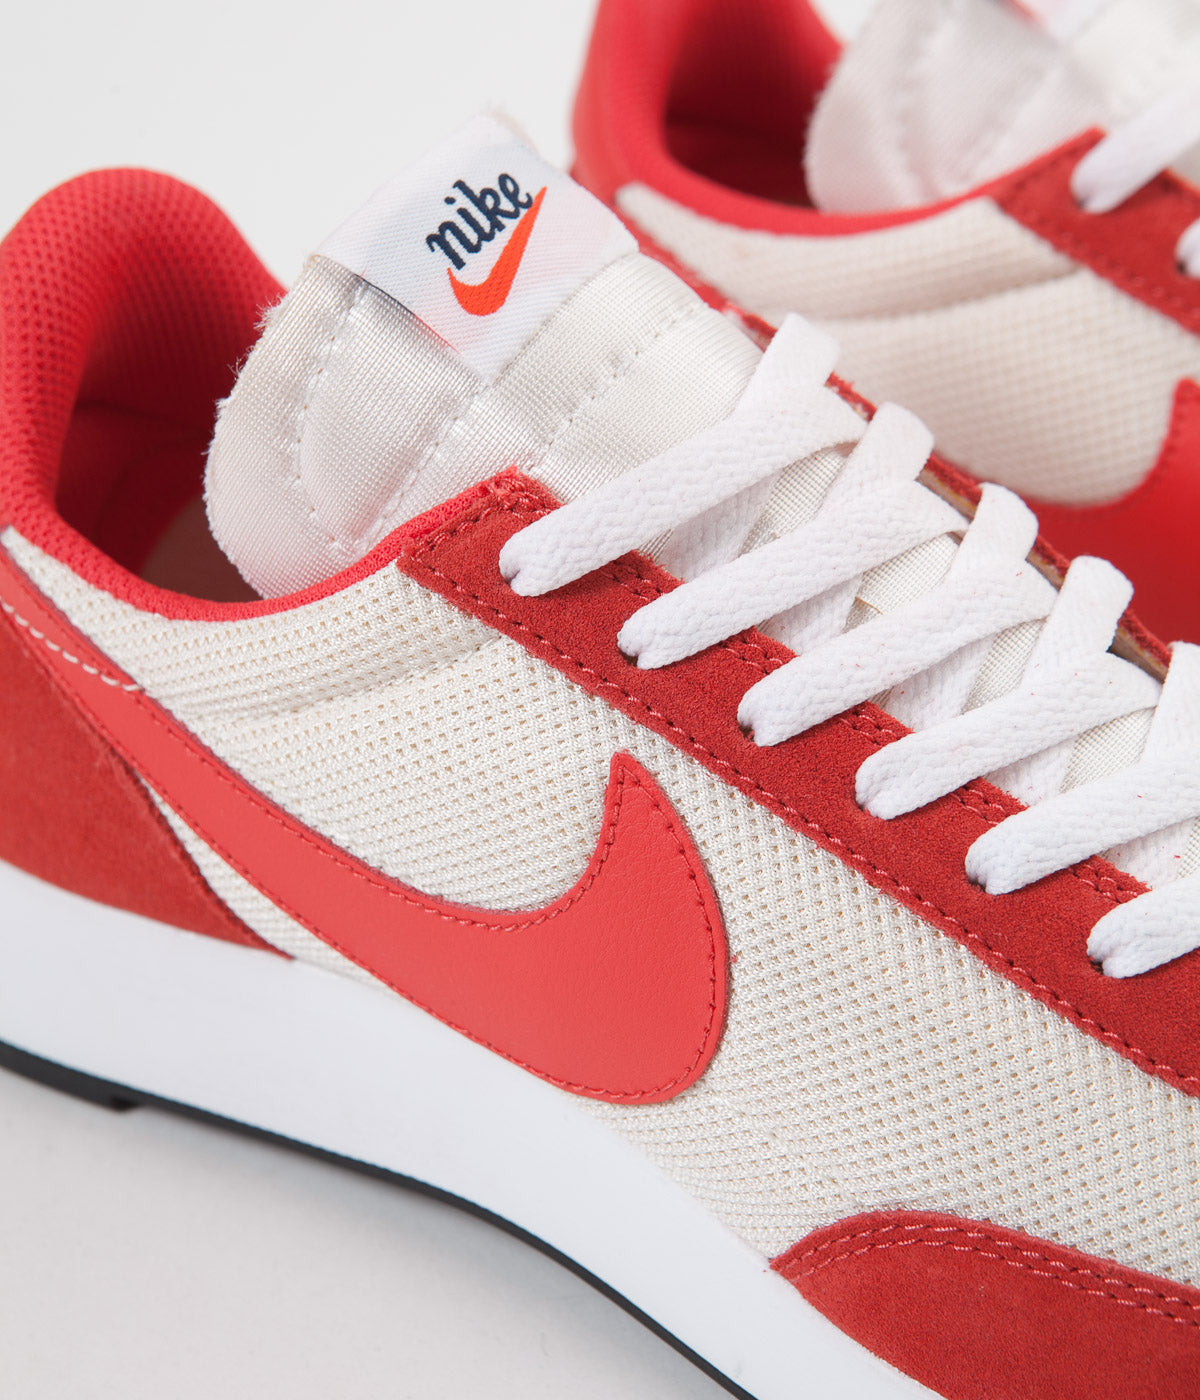 nike air tailwind 79 red white blue